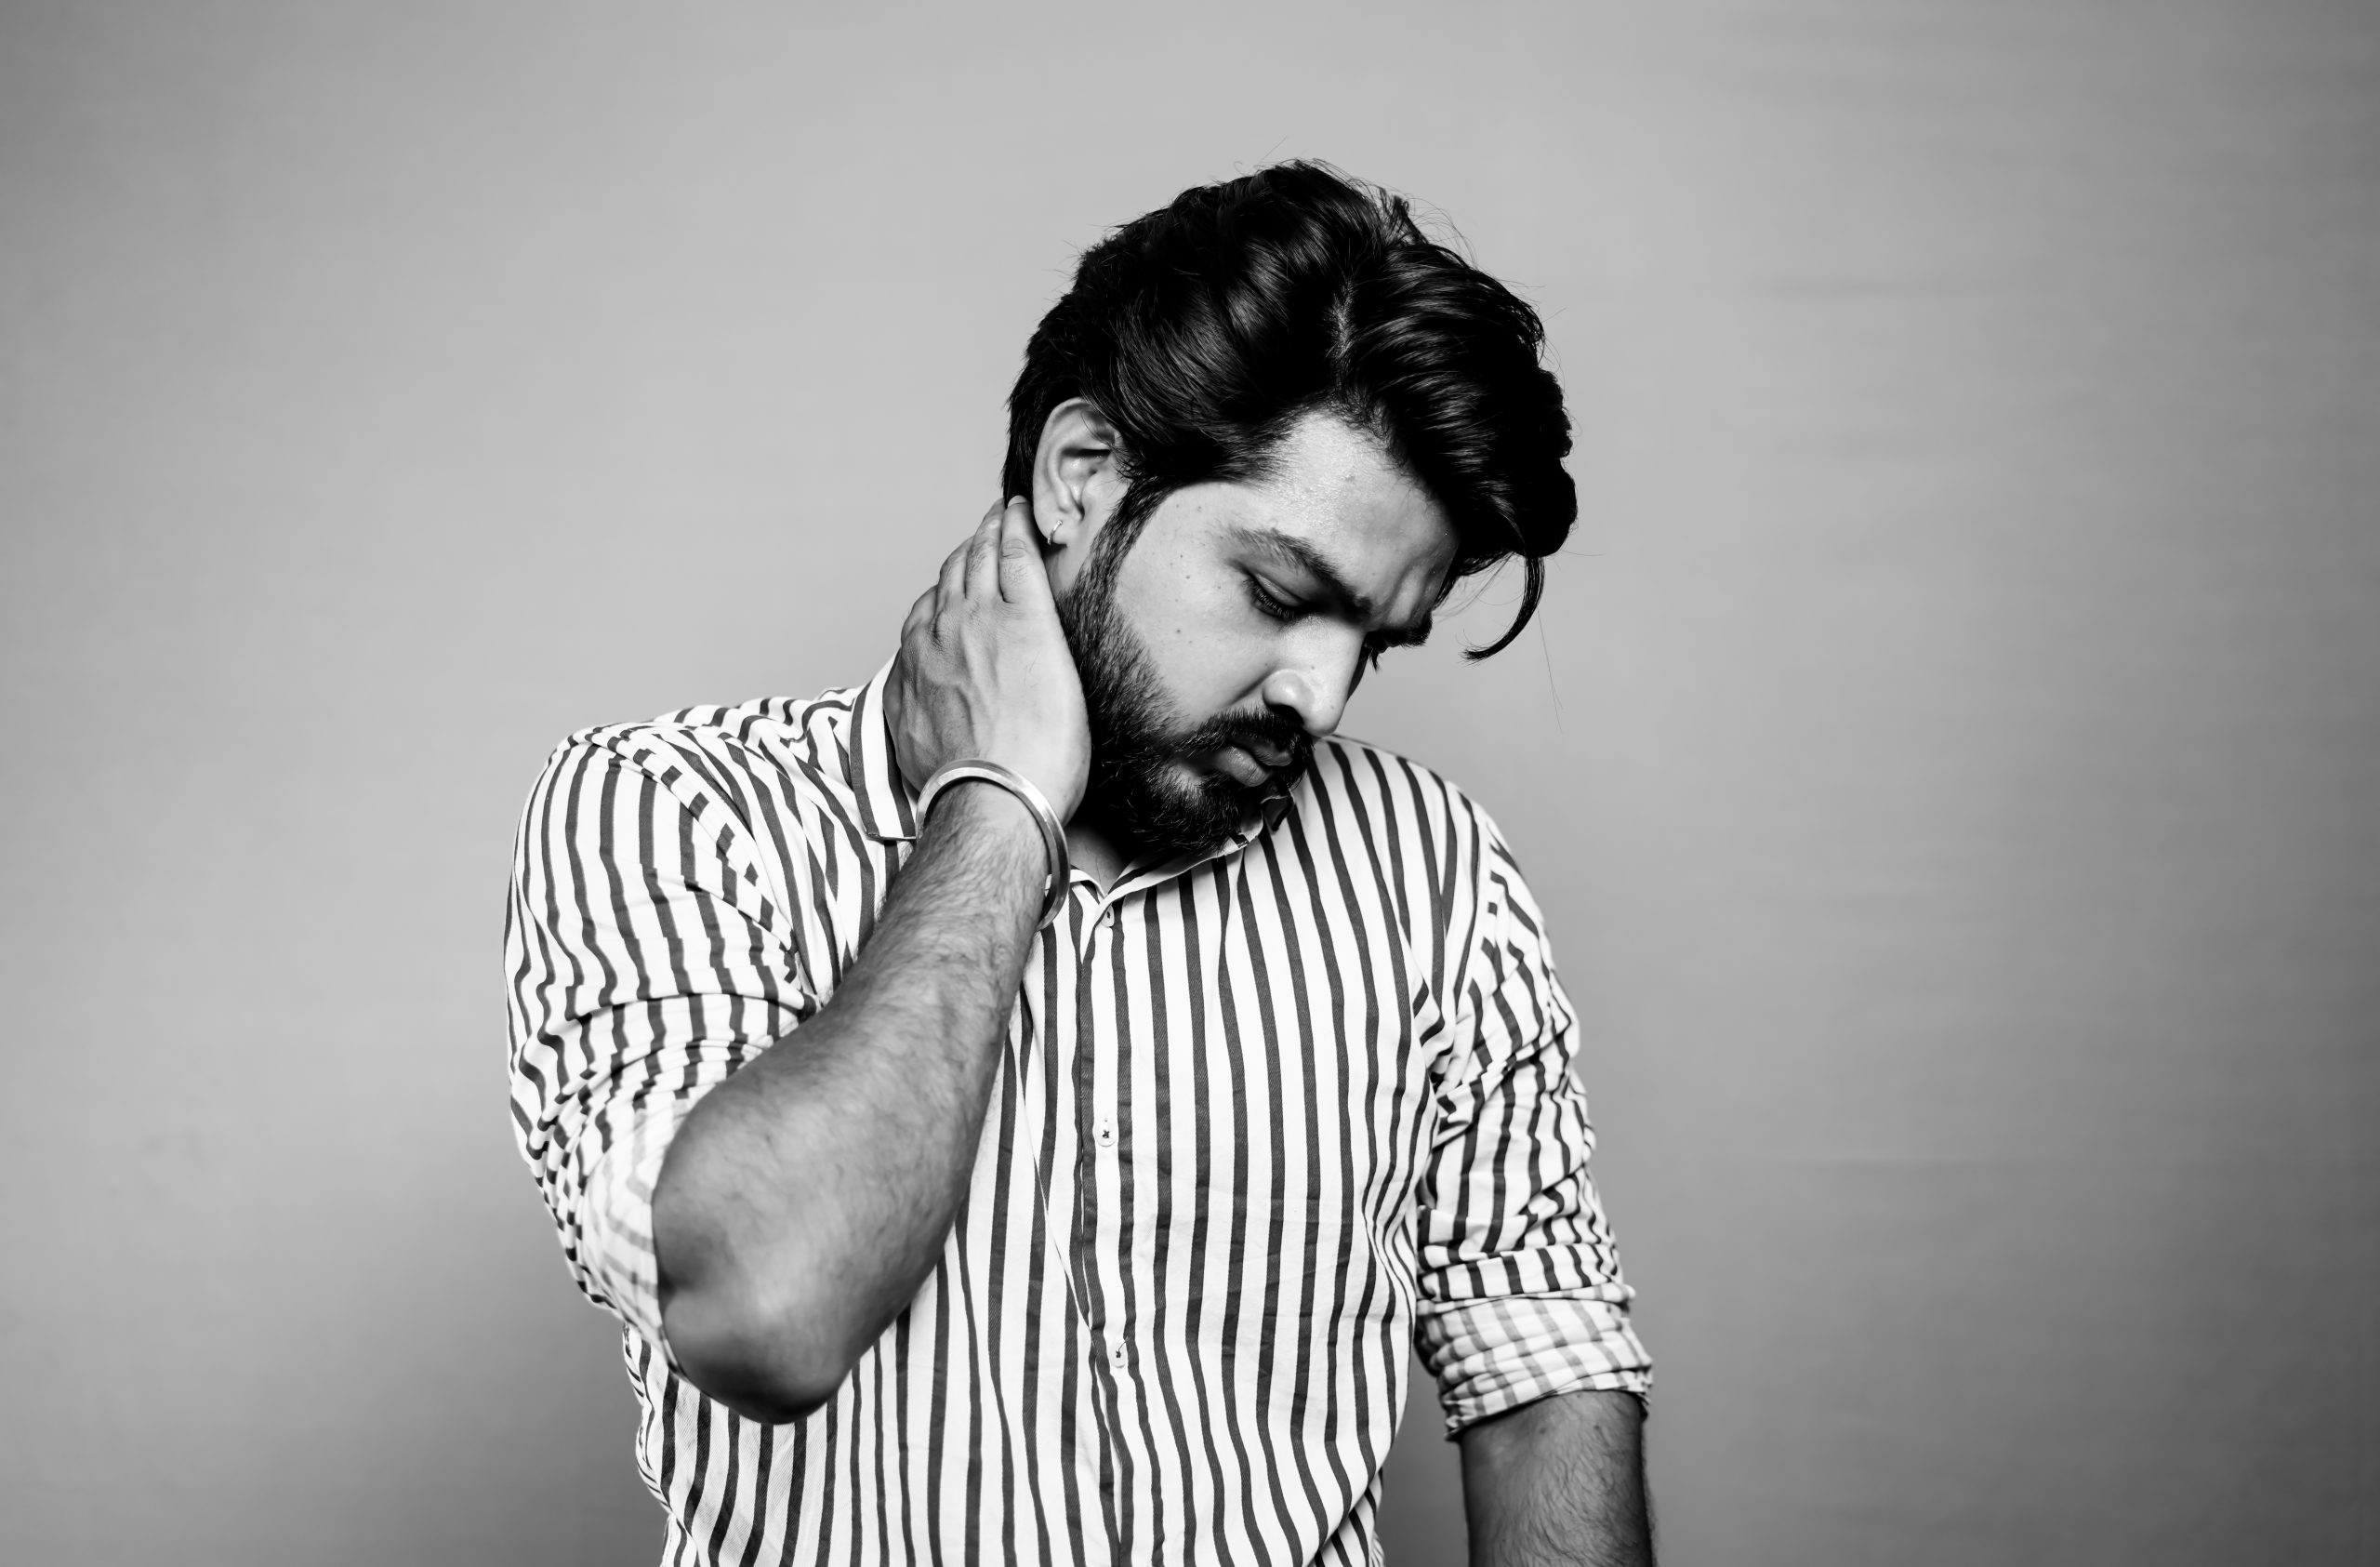 Indian male model in black and white with hand on his neck